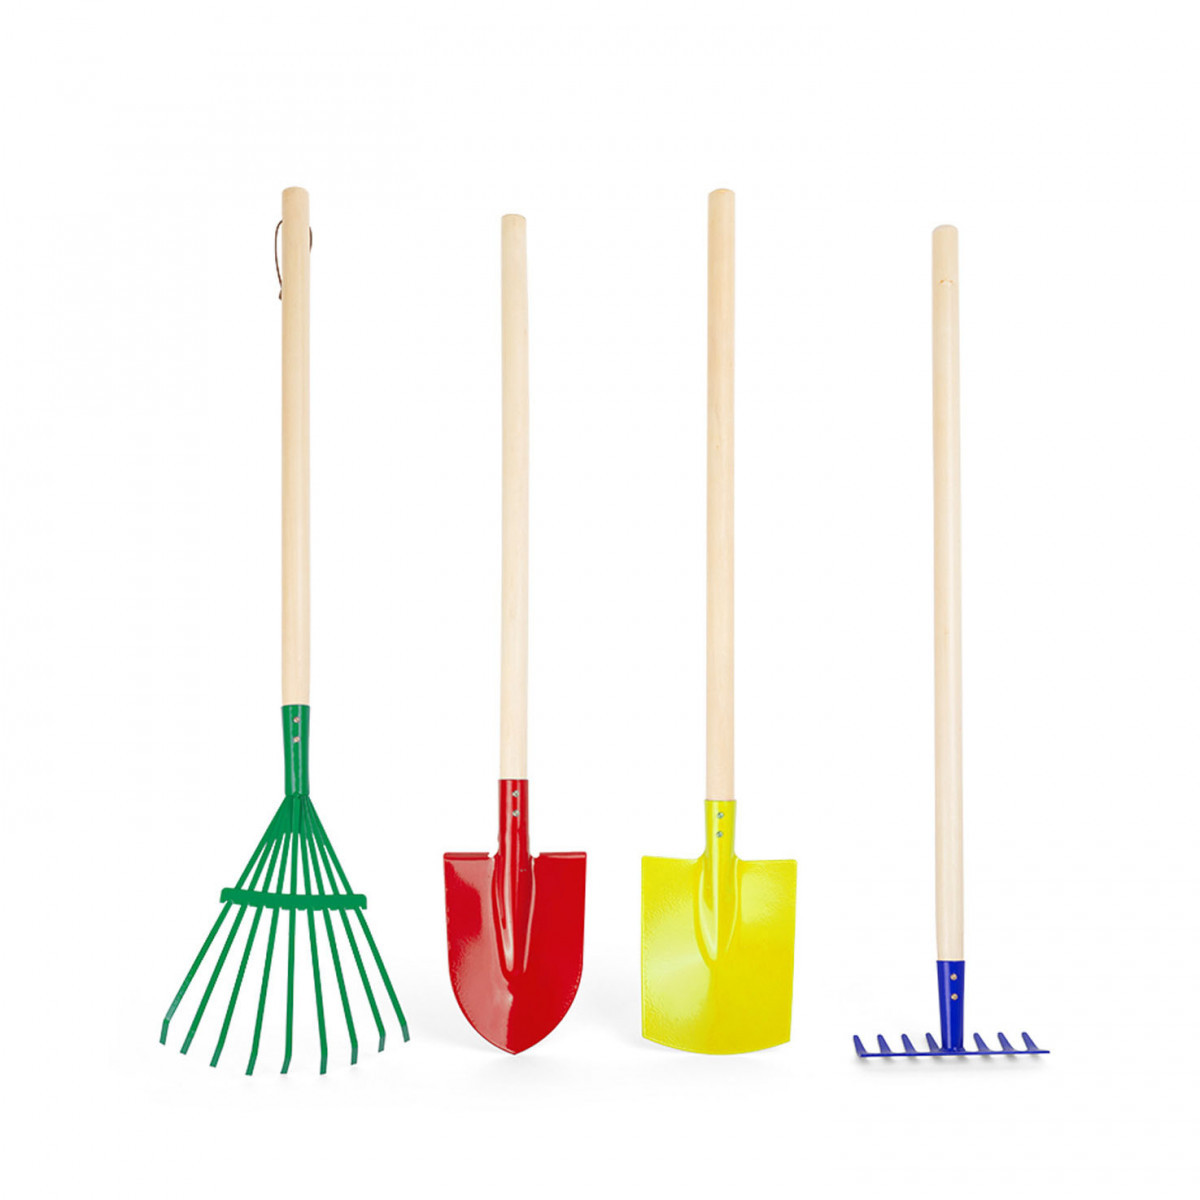 Small Foot Set of Colorful Garden Tools